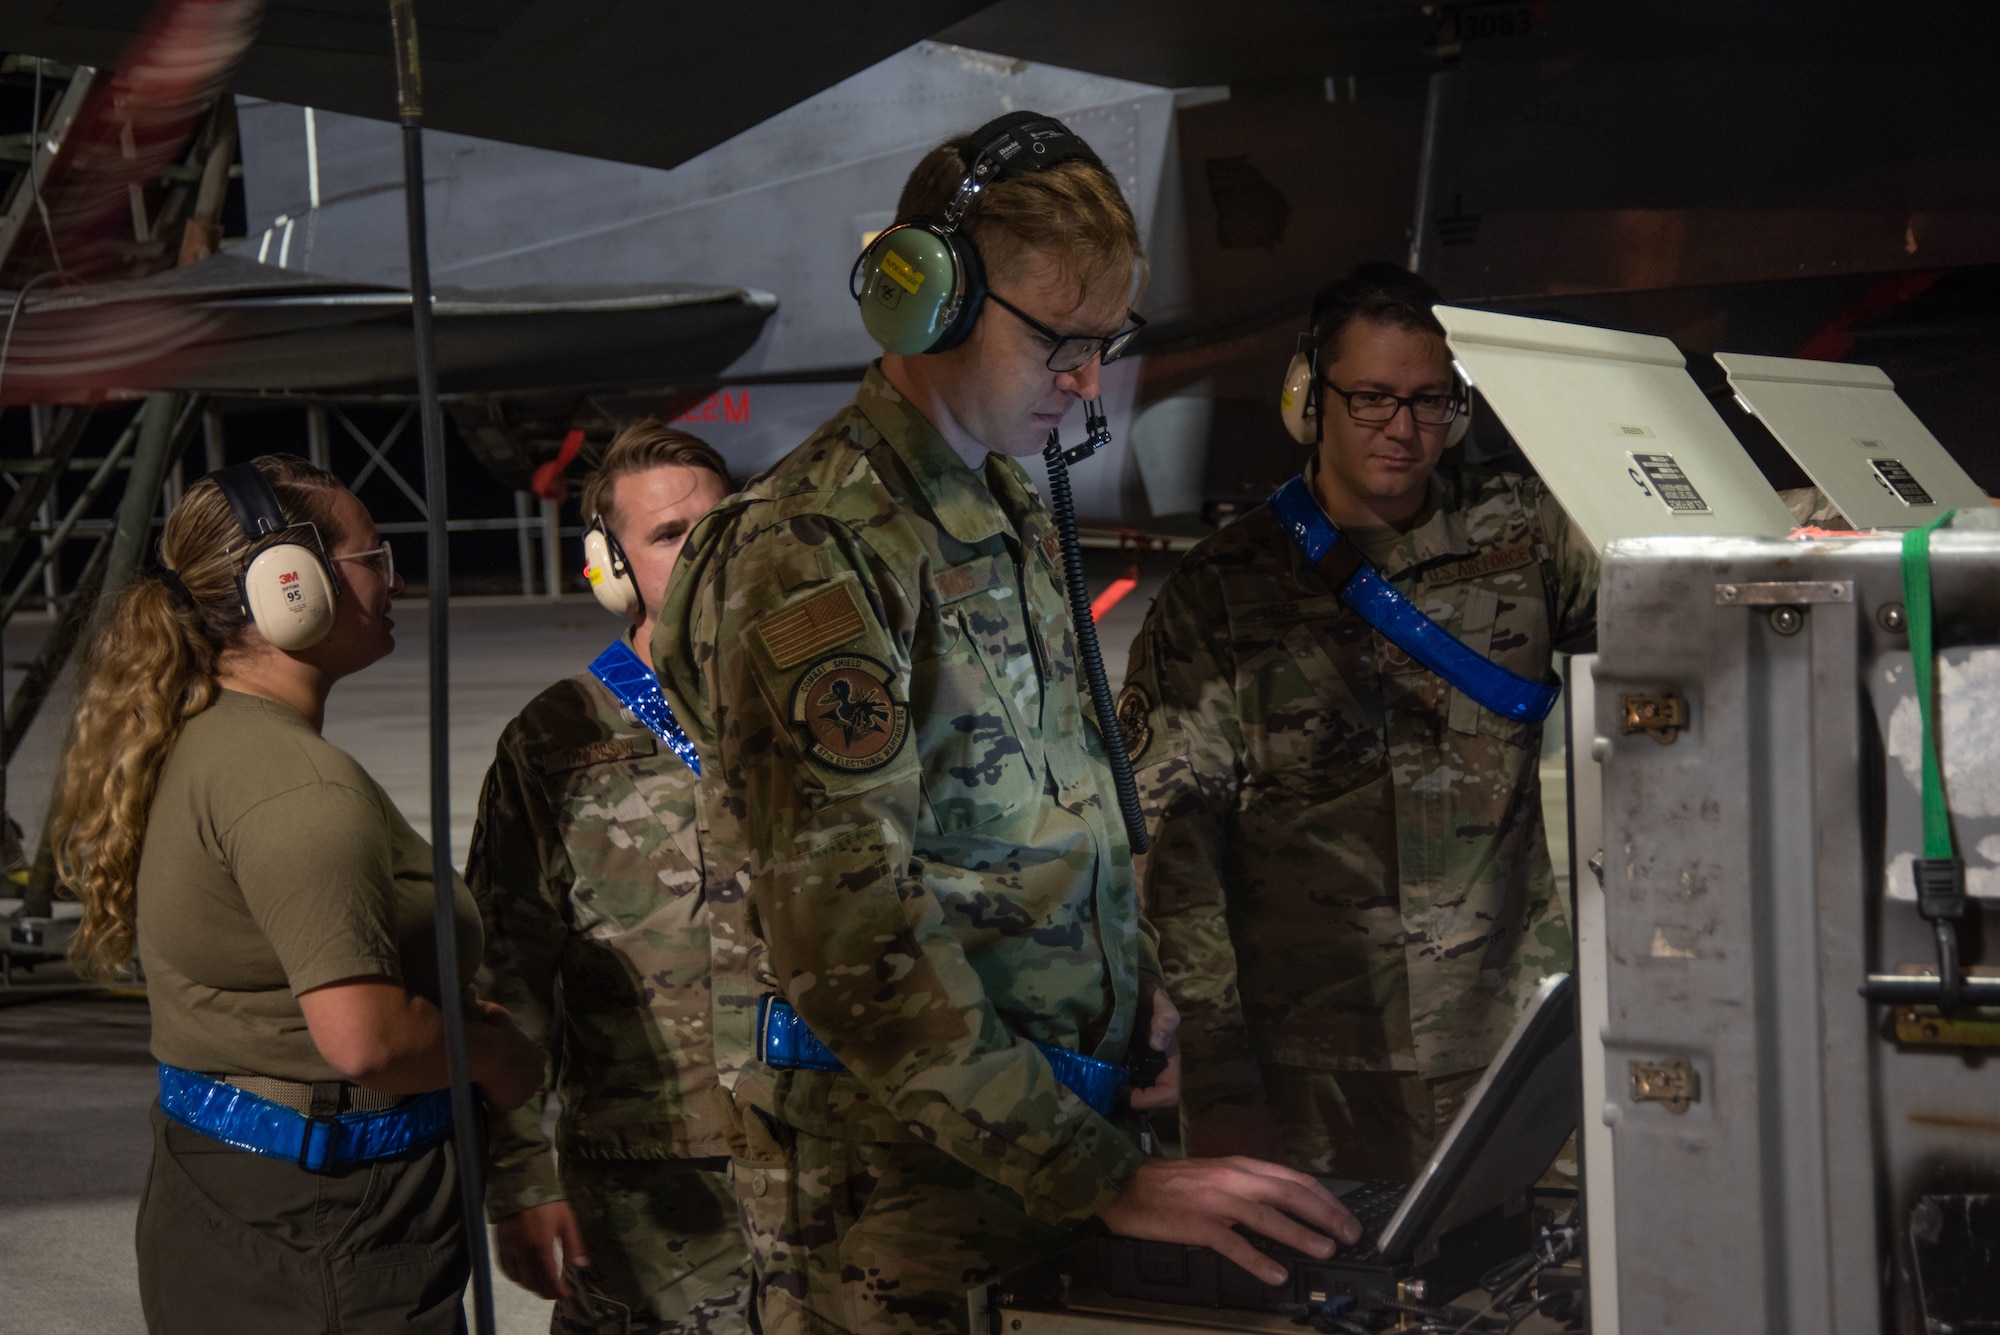 The Combat Shield members look at the data from the Radar Warning Receiver.